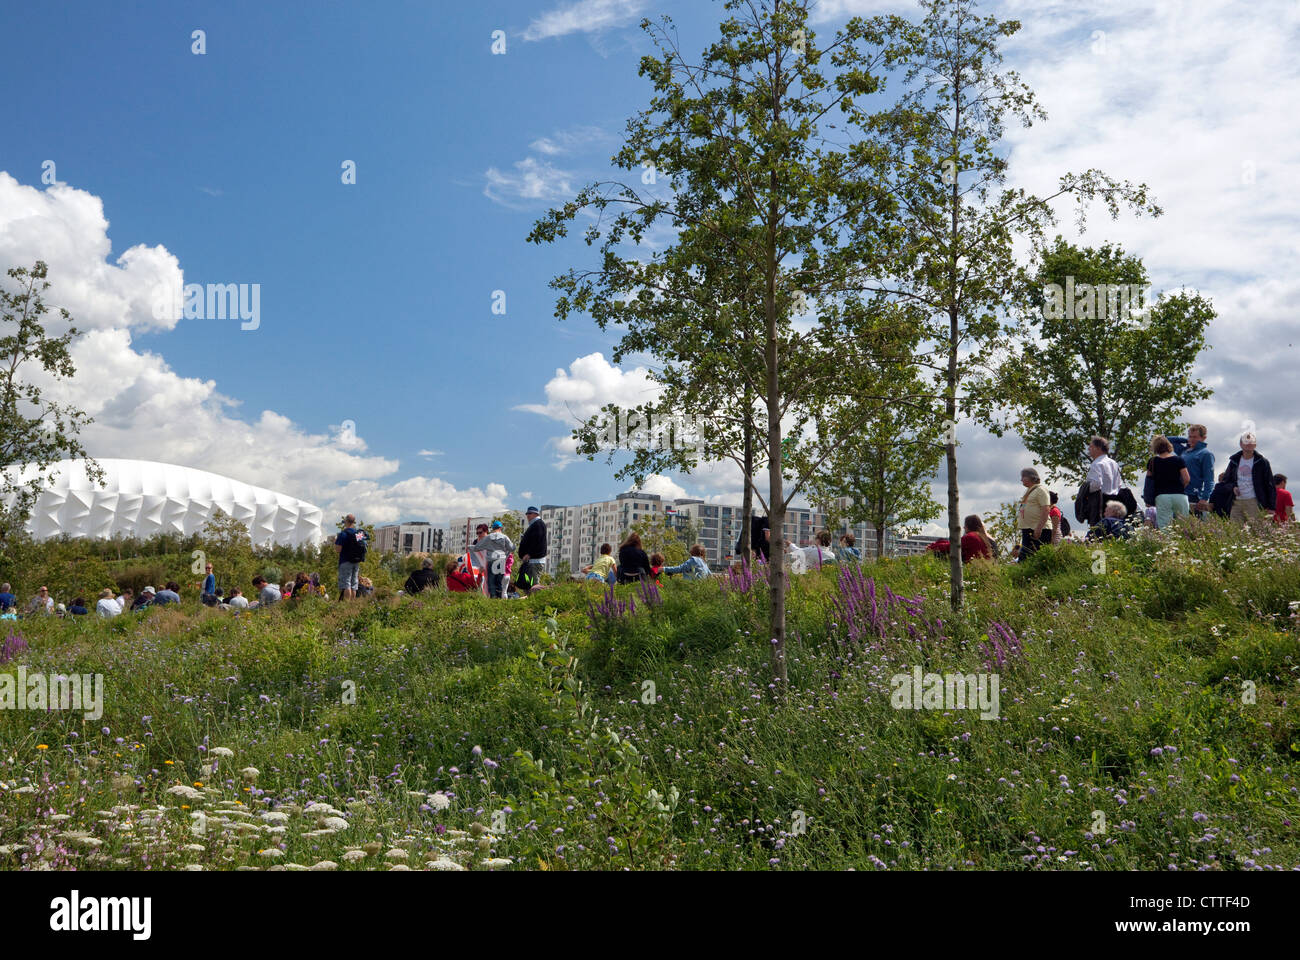 London 2012 Olympic Games - people in landscaped area Stock Photo